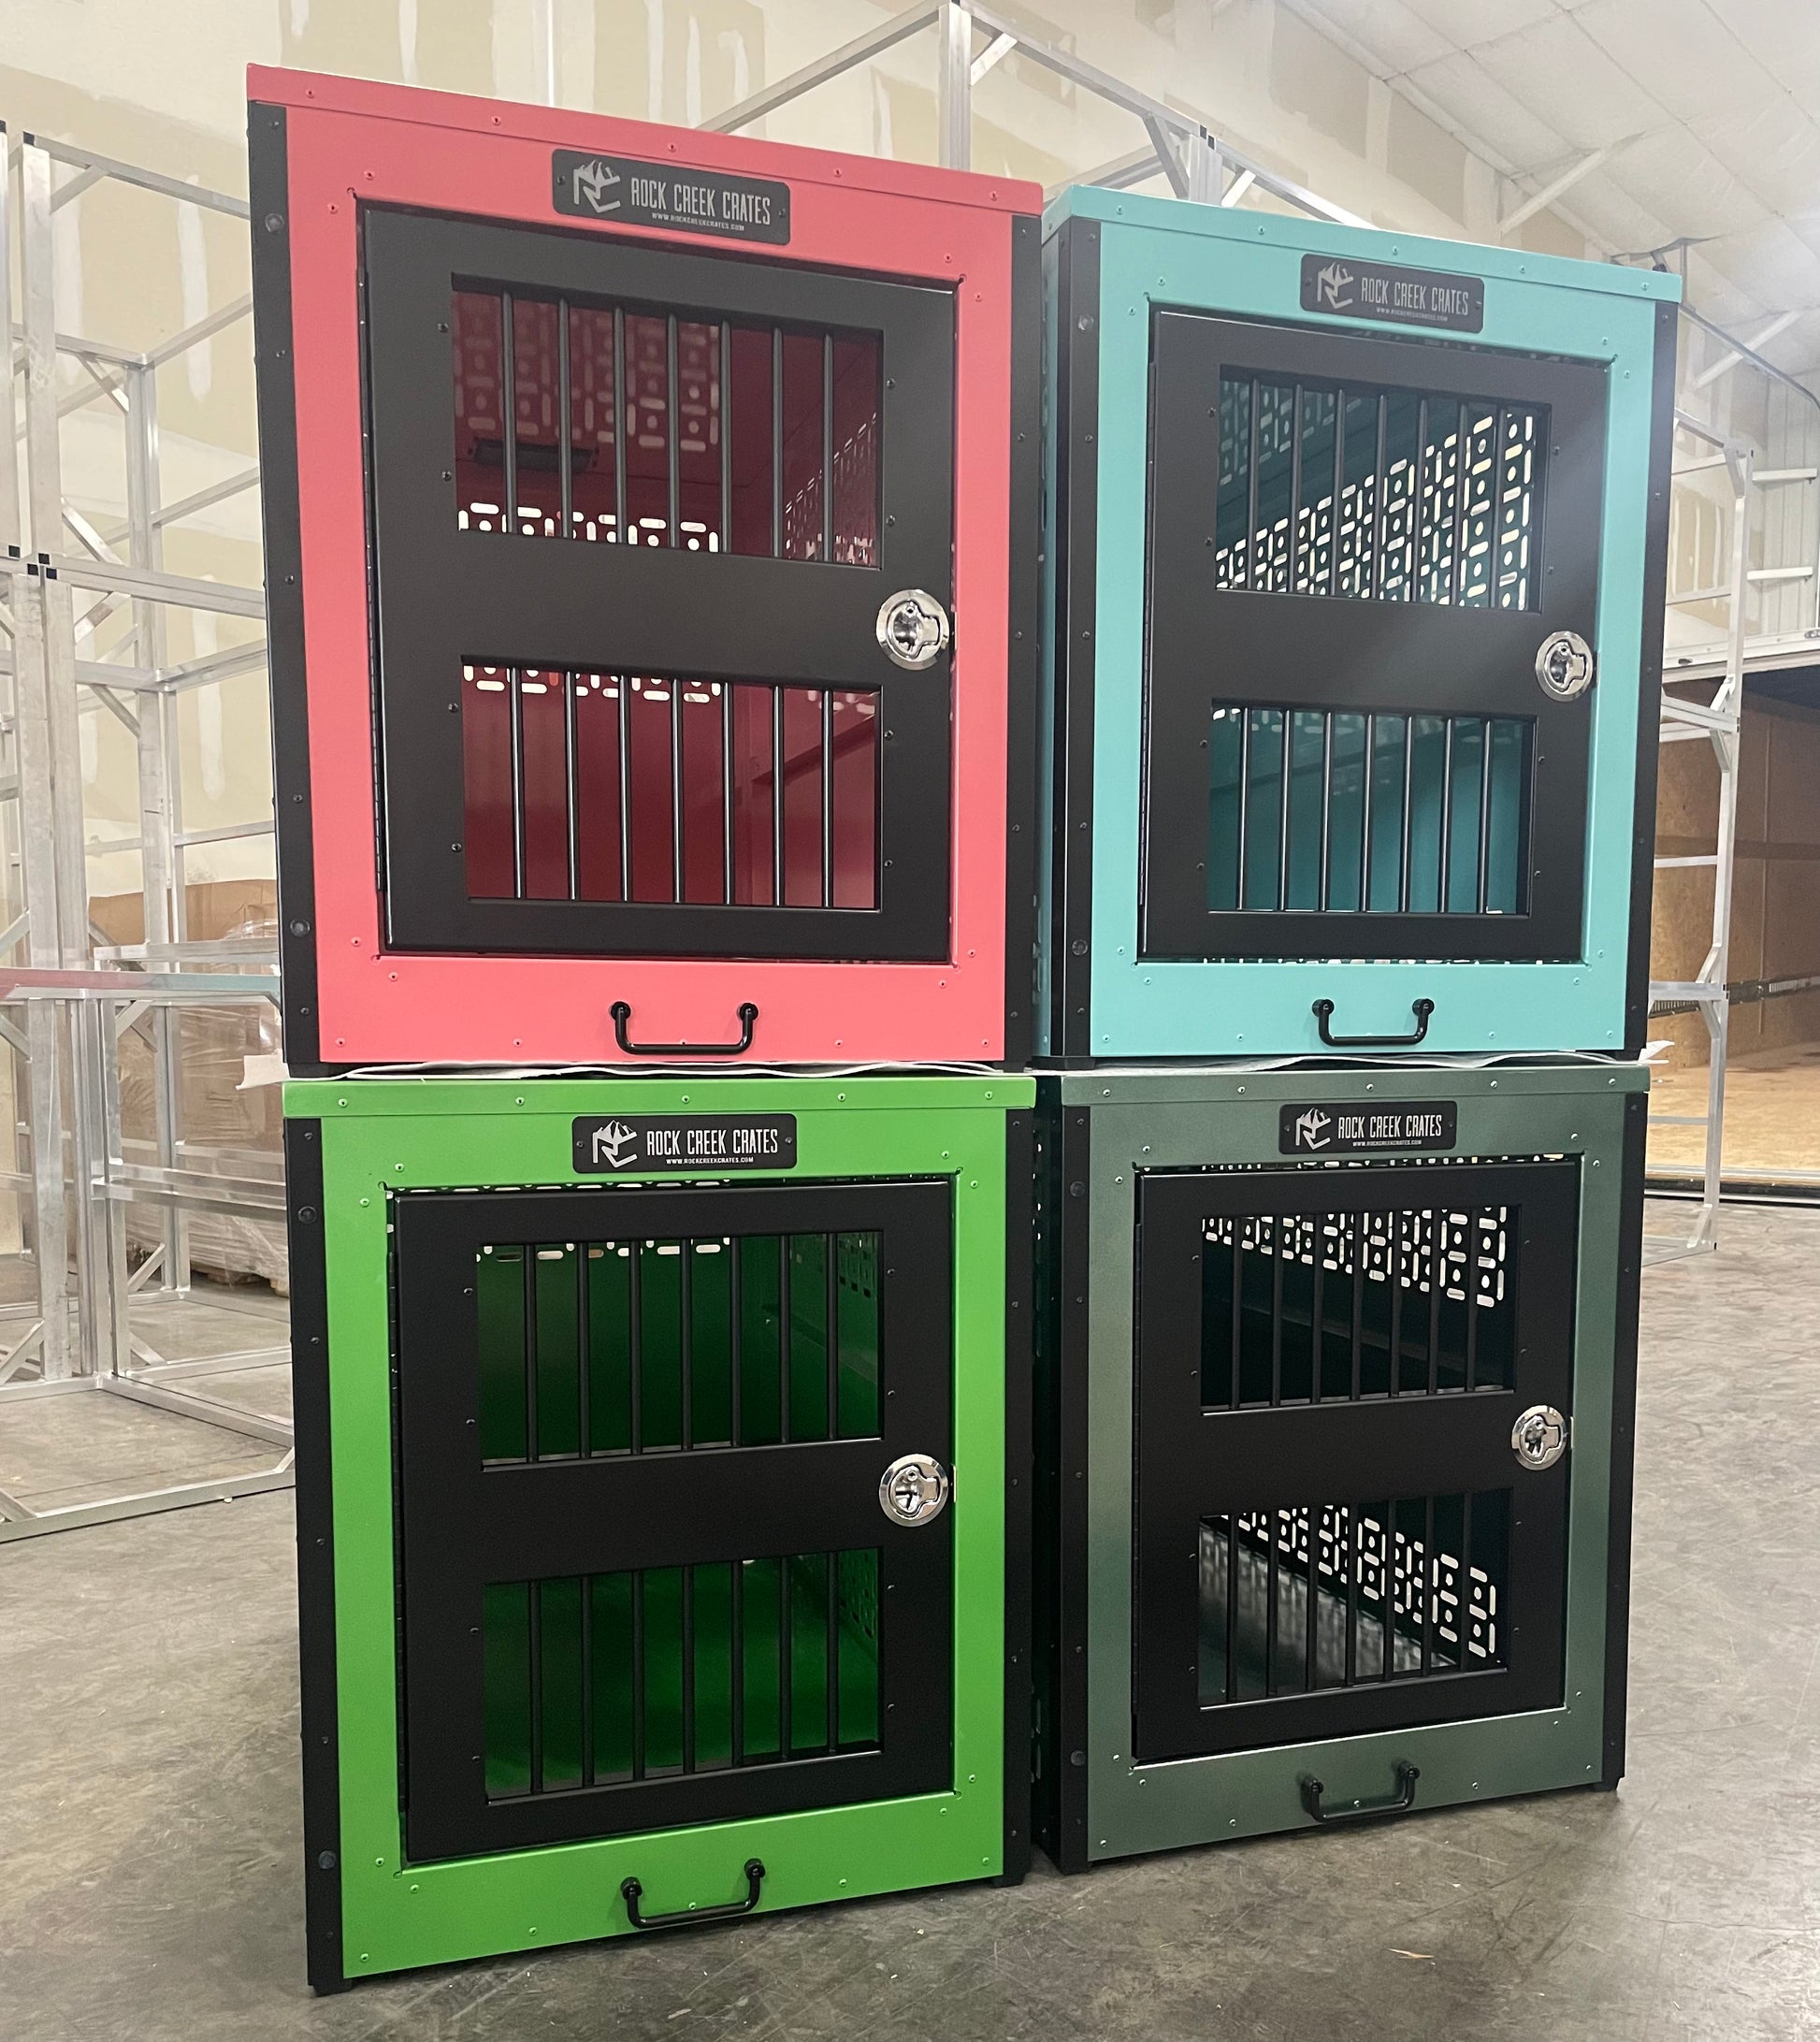 Stacked Custom-colored dog crates by Rock Creek Crates